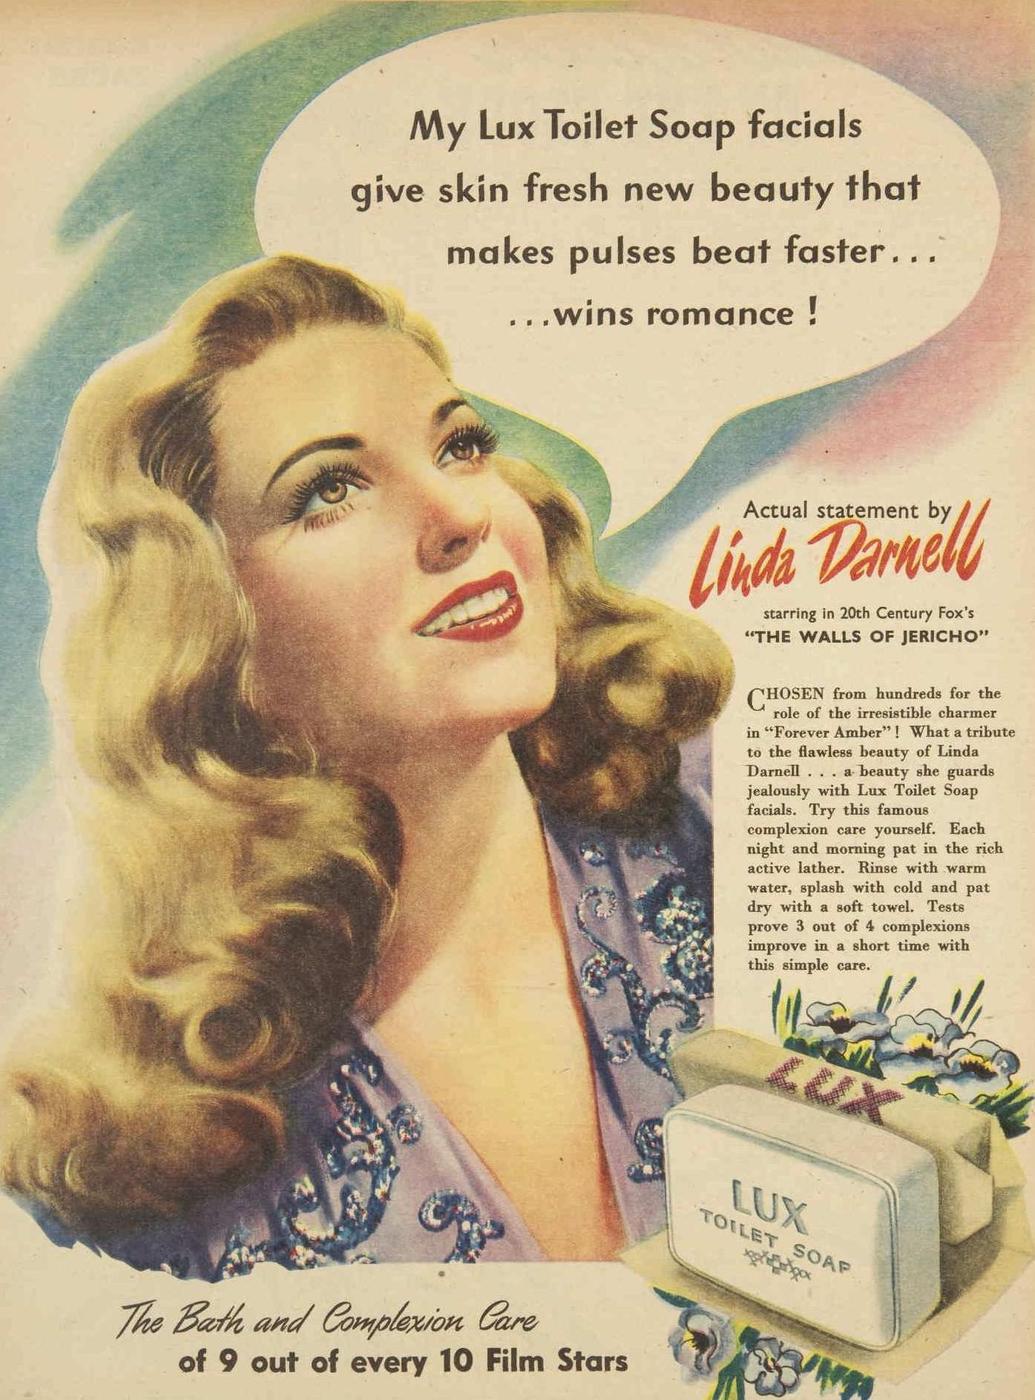 Lux Toilet Soap featuring Linda Darnell - 1948